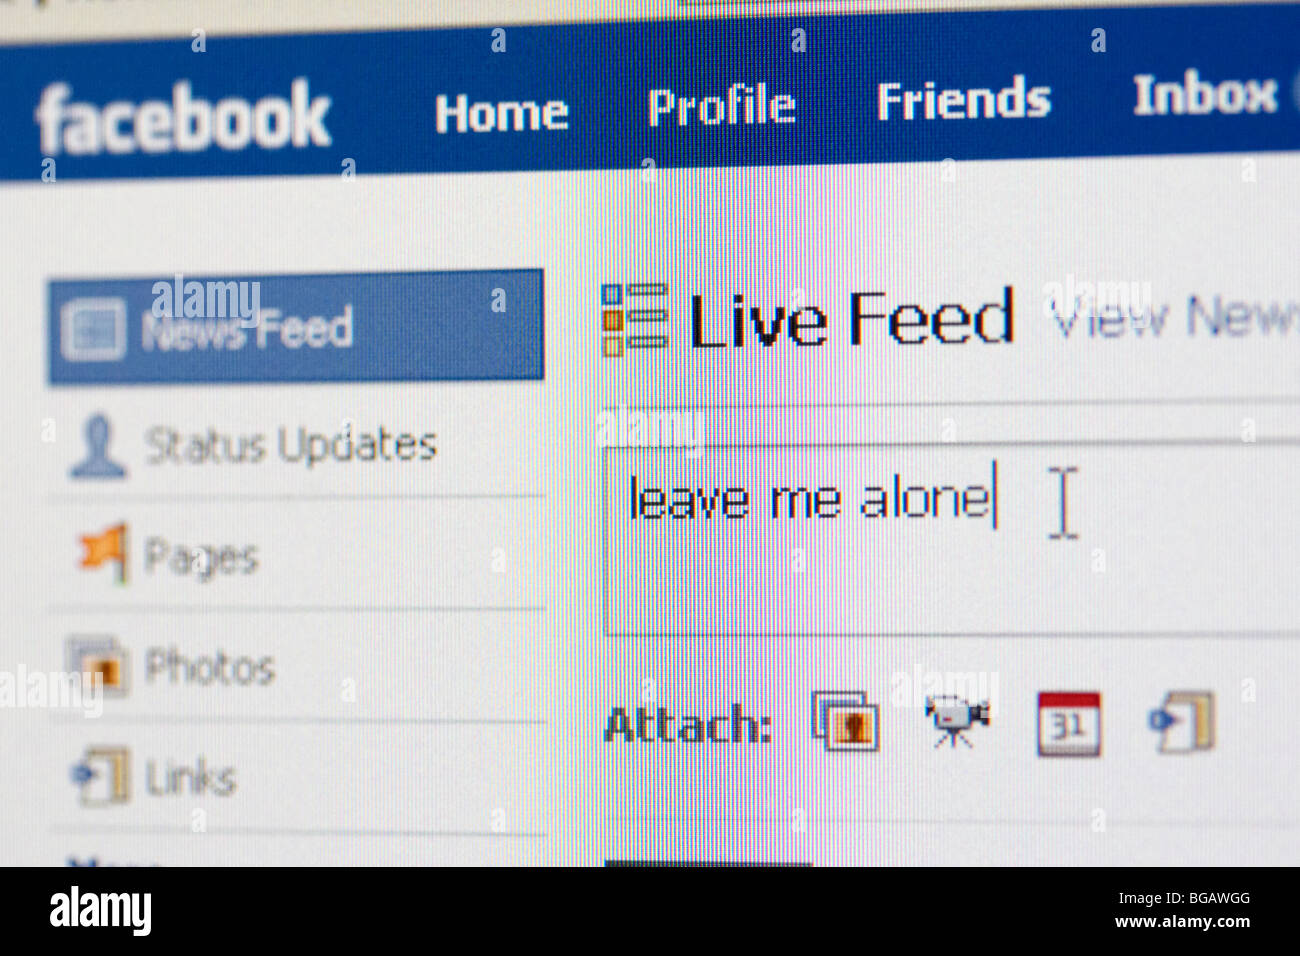 screenshot of leave me alone being typed into live feed status of facebook social networking website for editorial use only Stock Photo